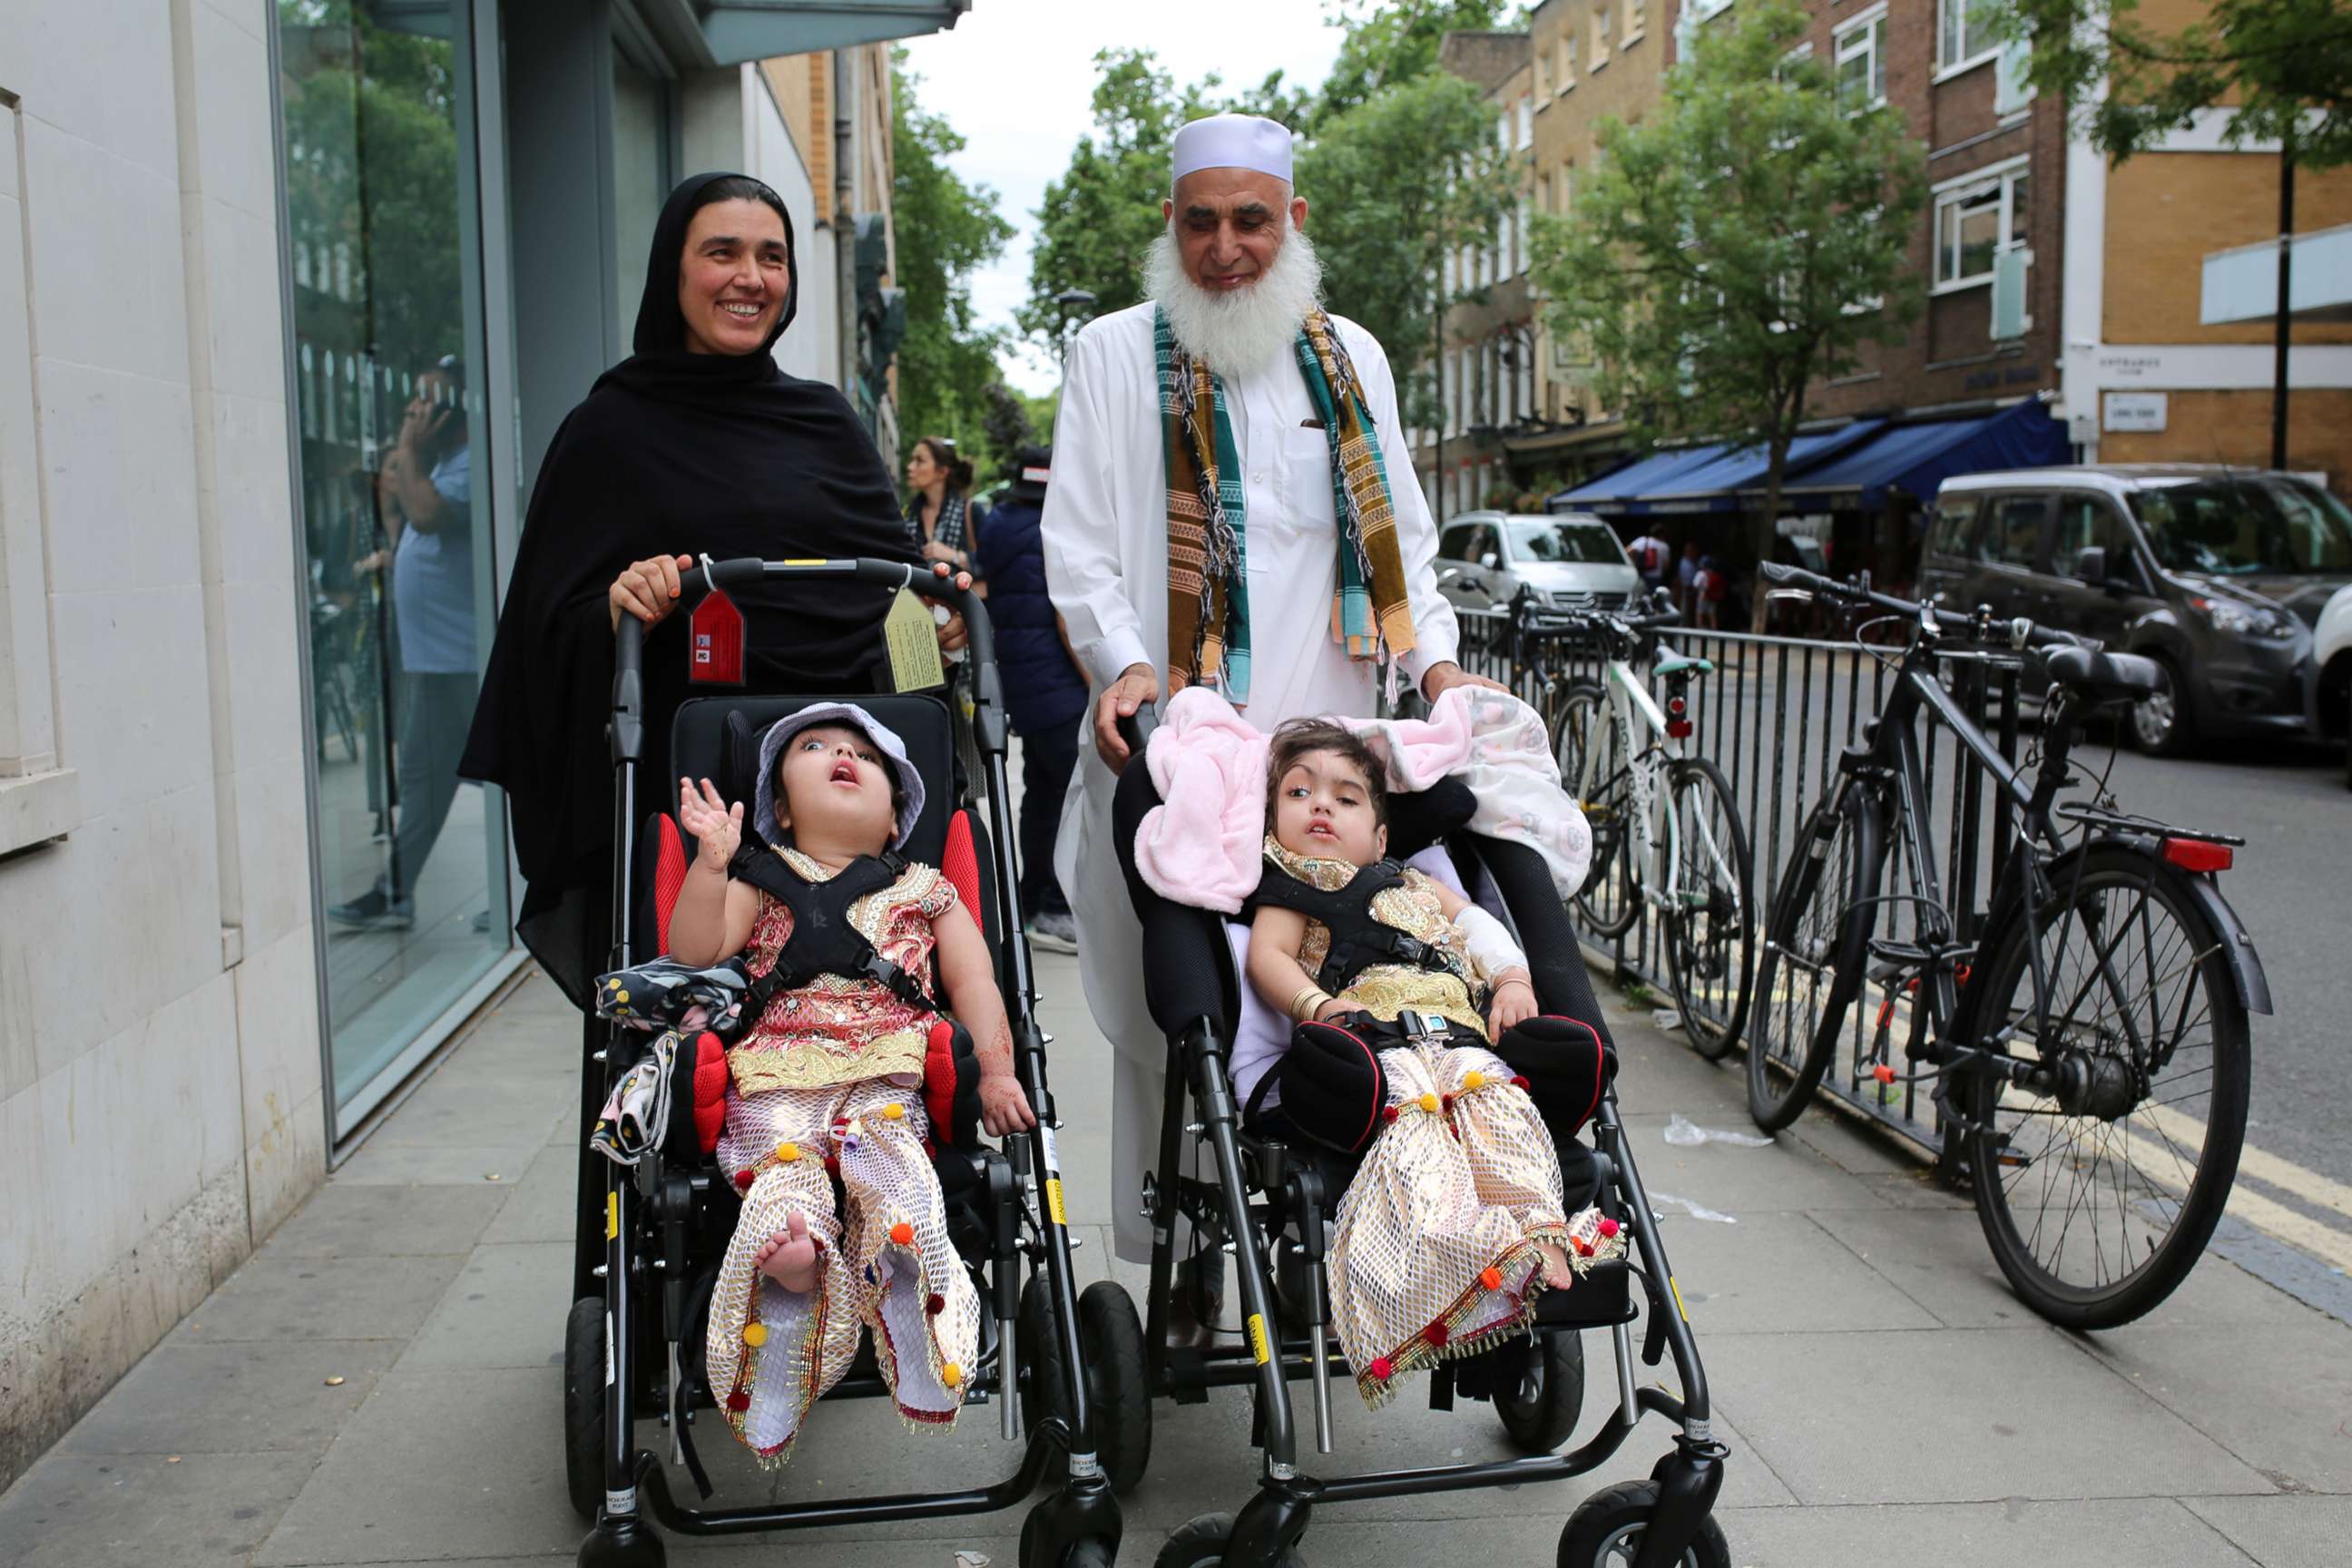 PHOTO: Two-year-old twins, born joined at the head, leave the hospital after a successful surgery at a British hospital in London, on July 1, 2019, in this handout photo released on July 16, 2019. 